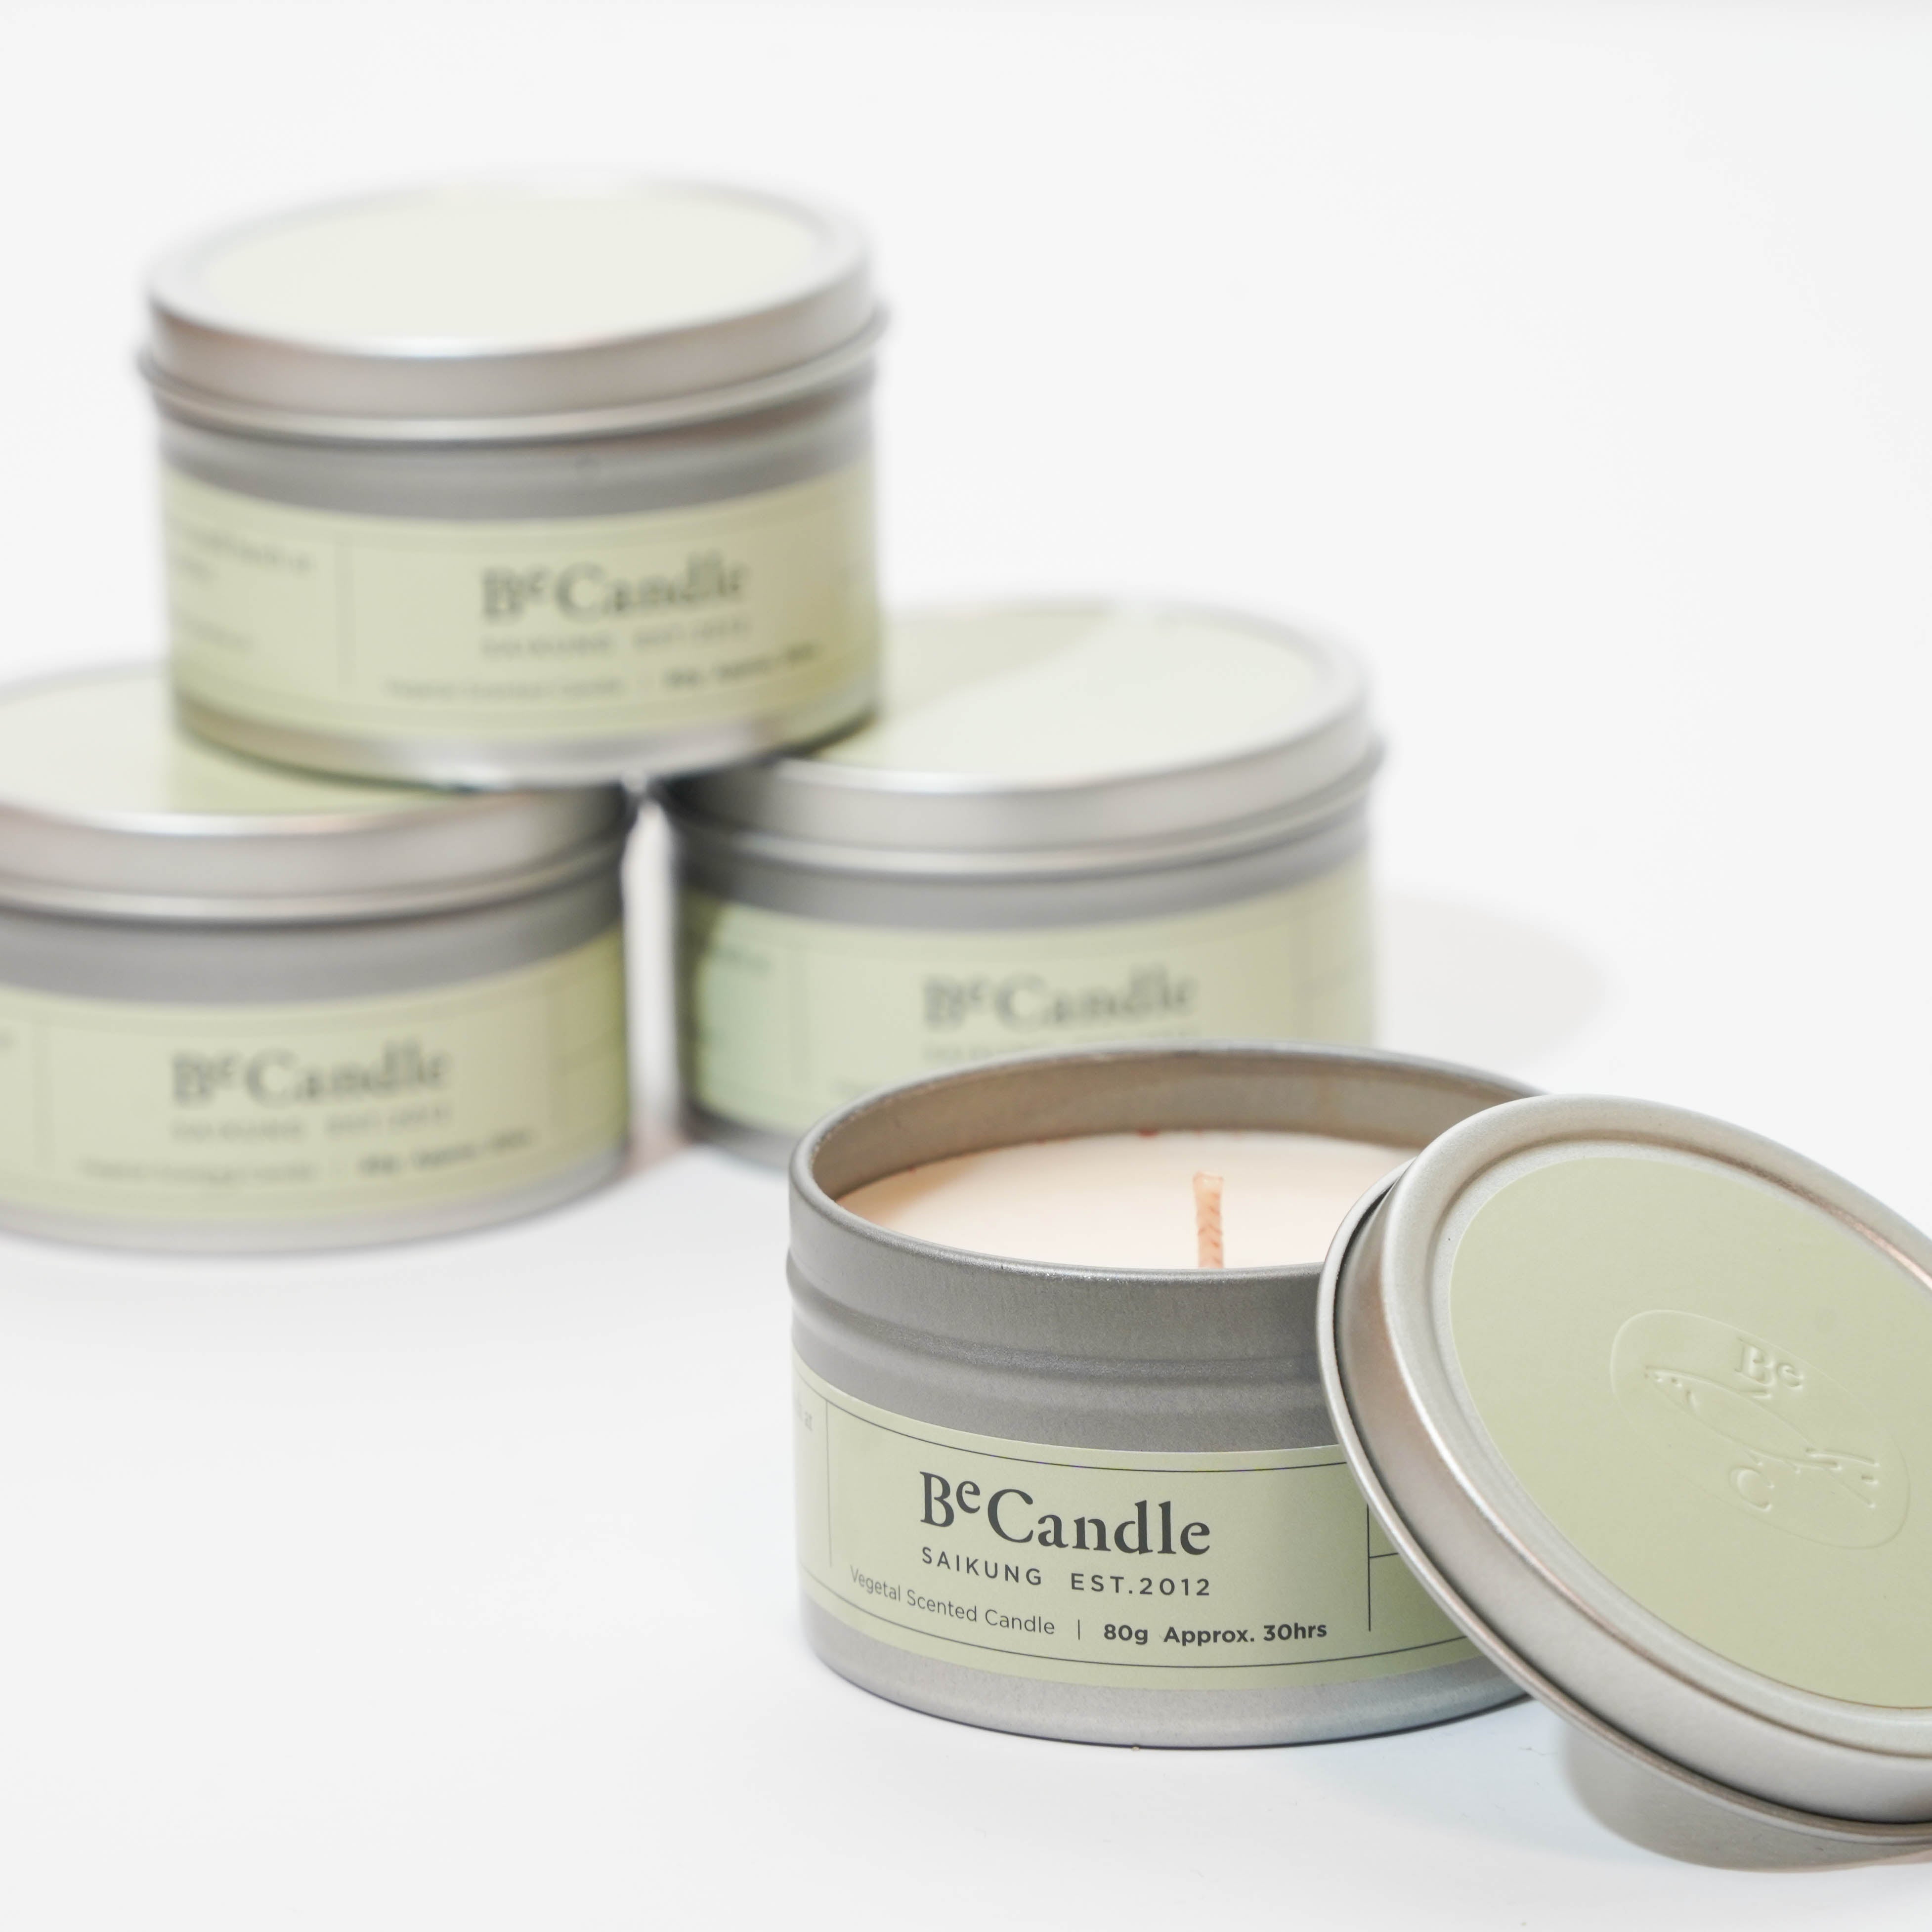 BeCandle 98. Gardenia - Travel size (80g / approx 30hrs)